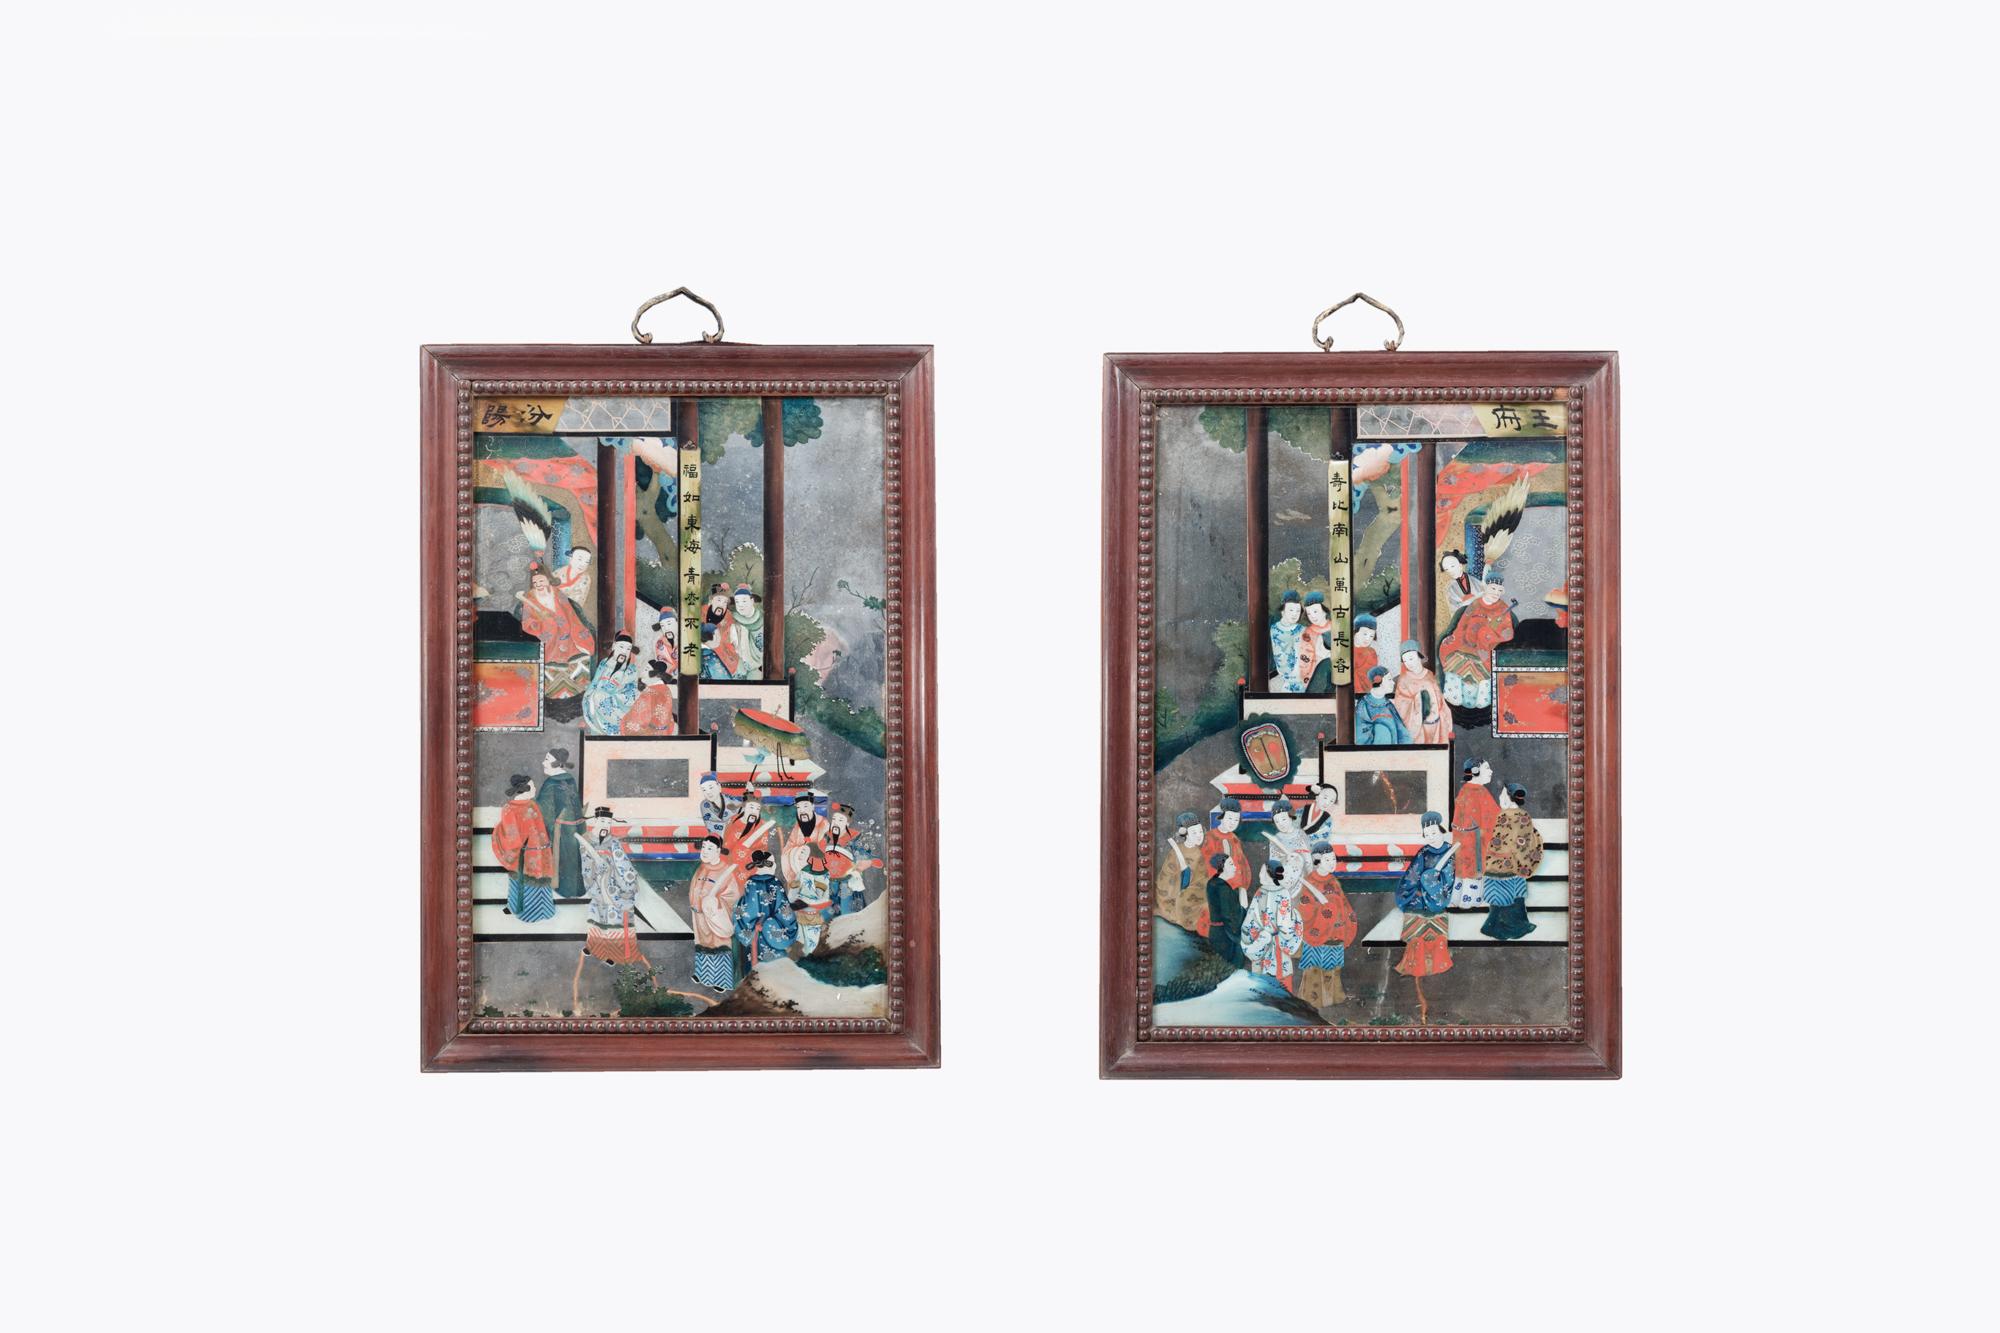 19th Century Pair Qing Dynasty Reverse Painted Mirrors depicting Court Scenes. Featuring Royal Figures and their servants and advisors. All wearing colourful traditional garments. A clean design rendered in vibrant shades and geometric shapes.

To